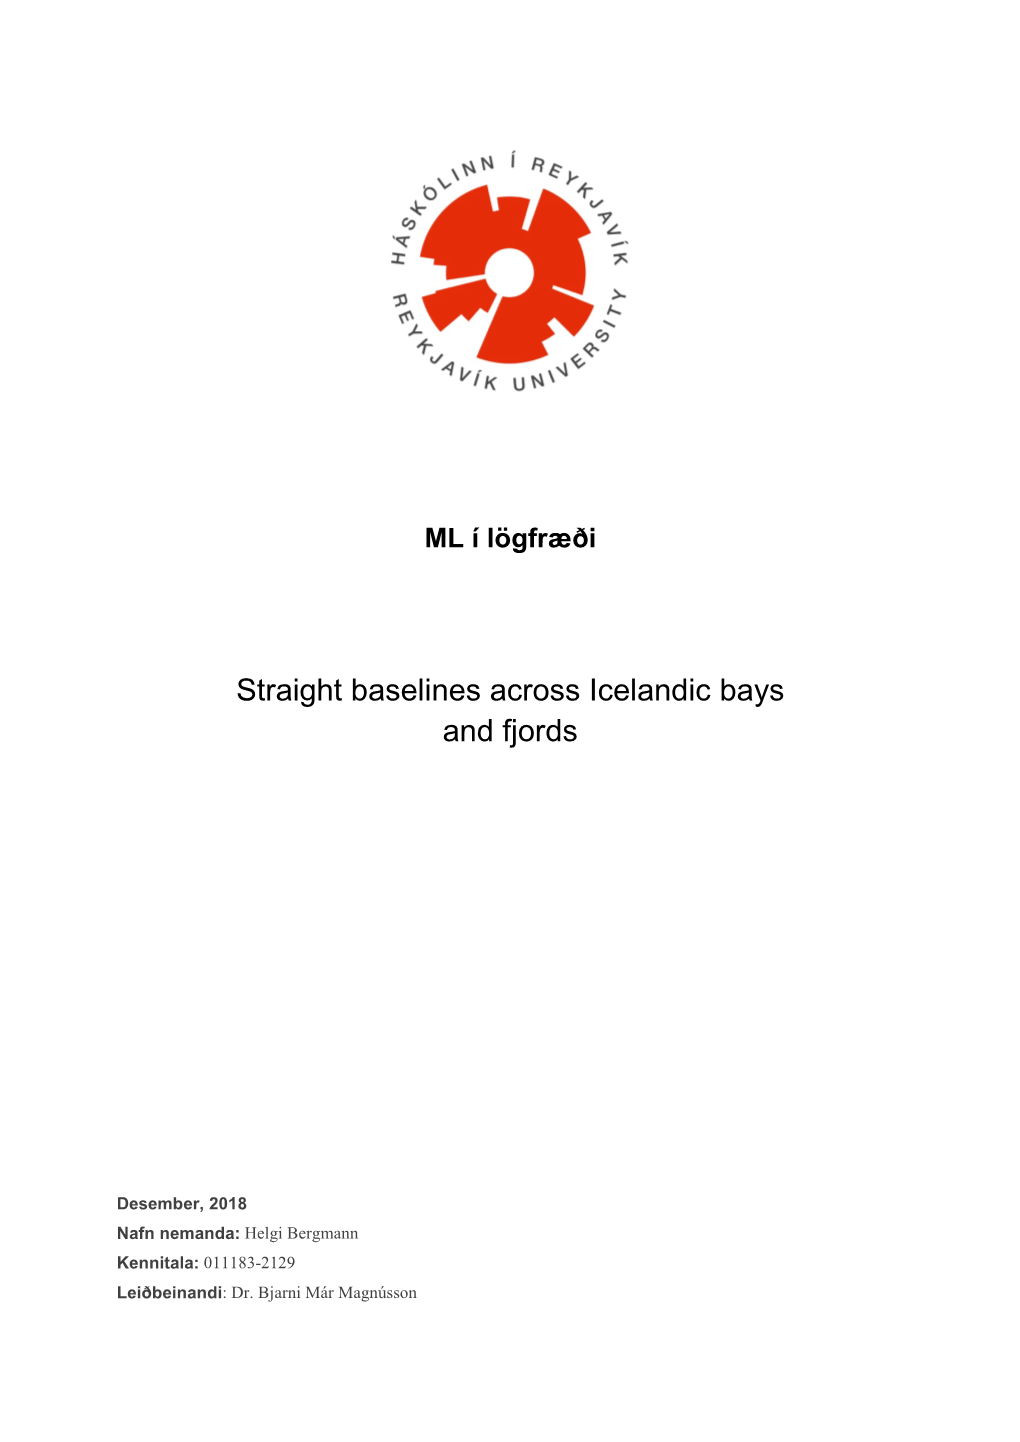 Straight Baselines Across Icelandic Bays and Fjords